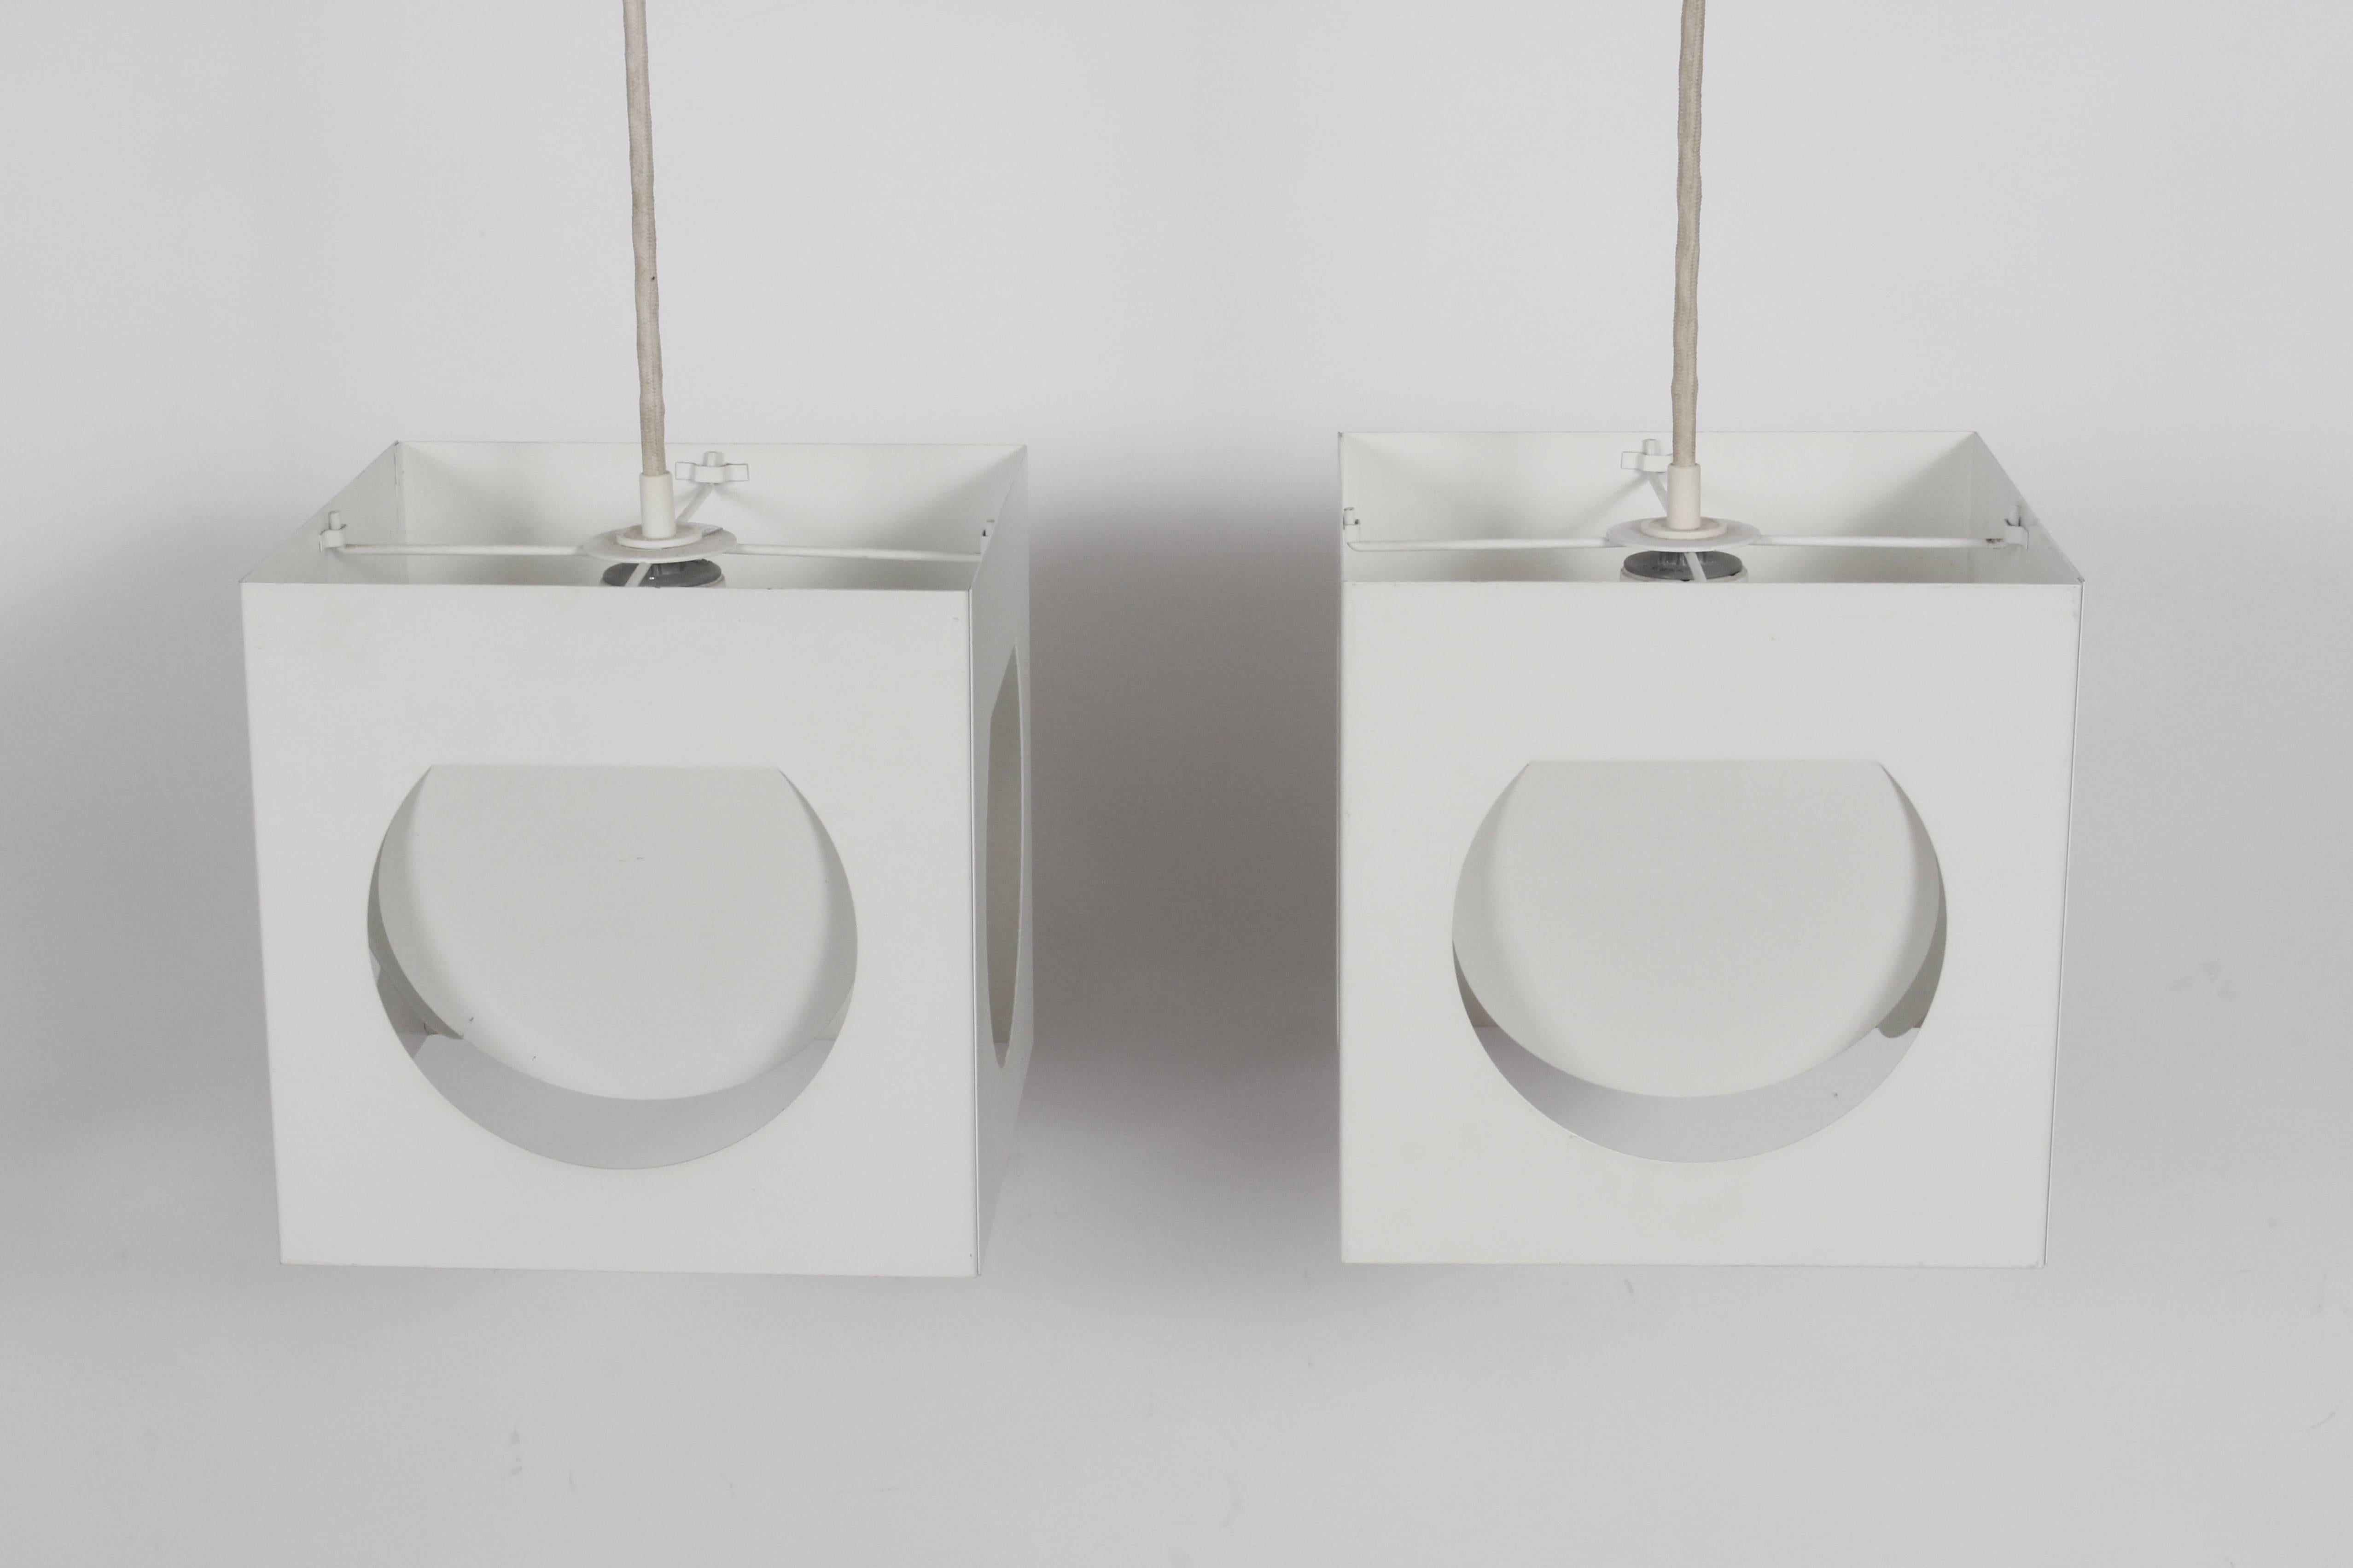 Pair of White (Model 61-193) Hanging Pendants by Shogo Suzuki for Orno Stockmann. 1960's. Featuring white coated folded metal cubes with rounded cut outs, with original coated white cord and elliptical light detail. Architectural. Minimalist.